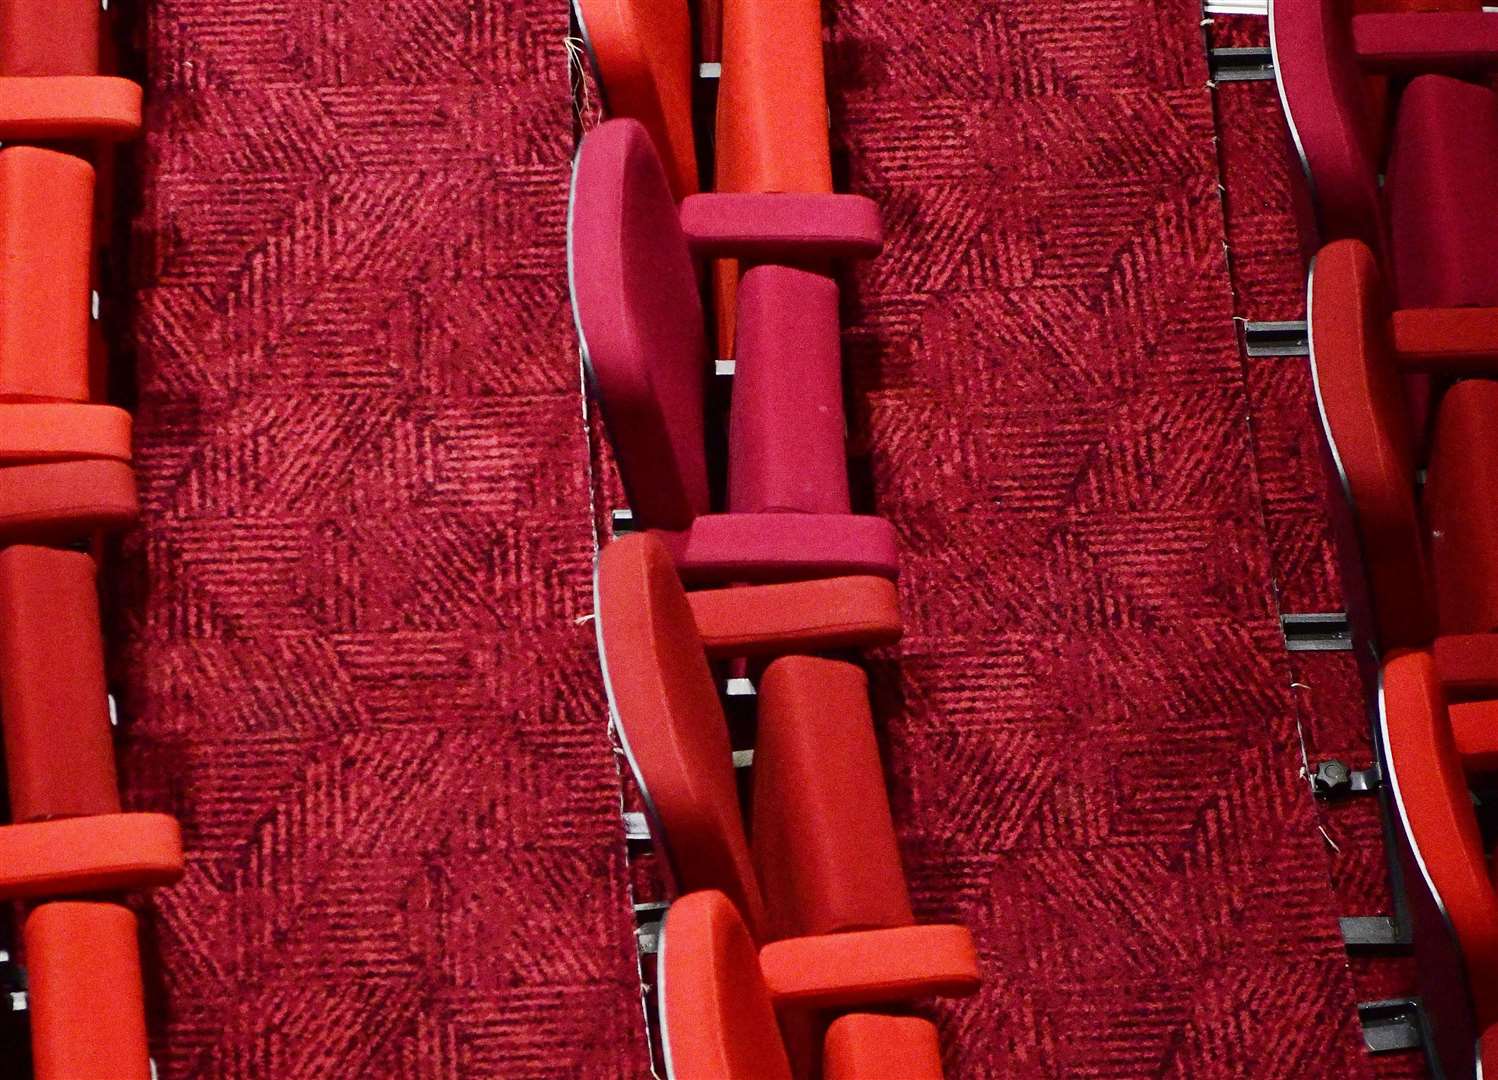 Selling empty theatre seats at last-minute discounts has long been a well-established practice